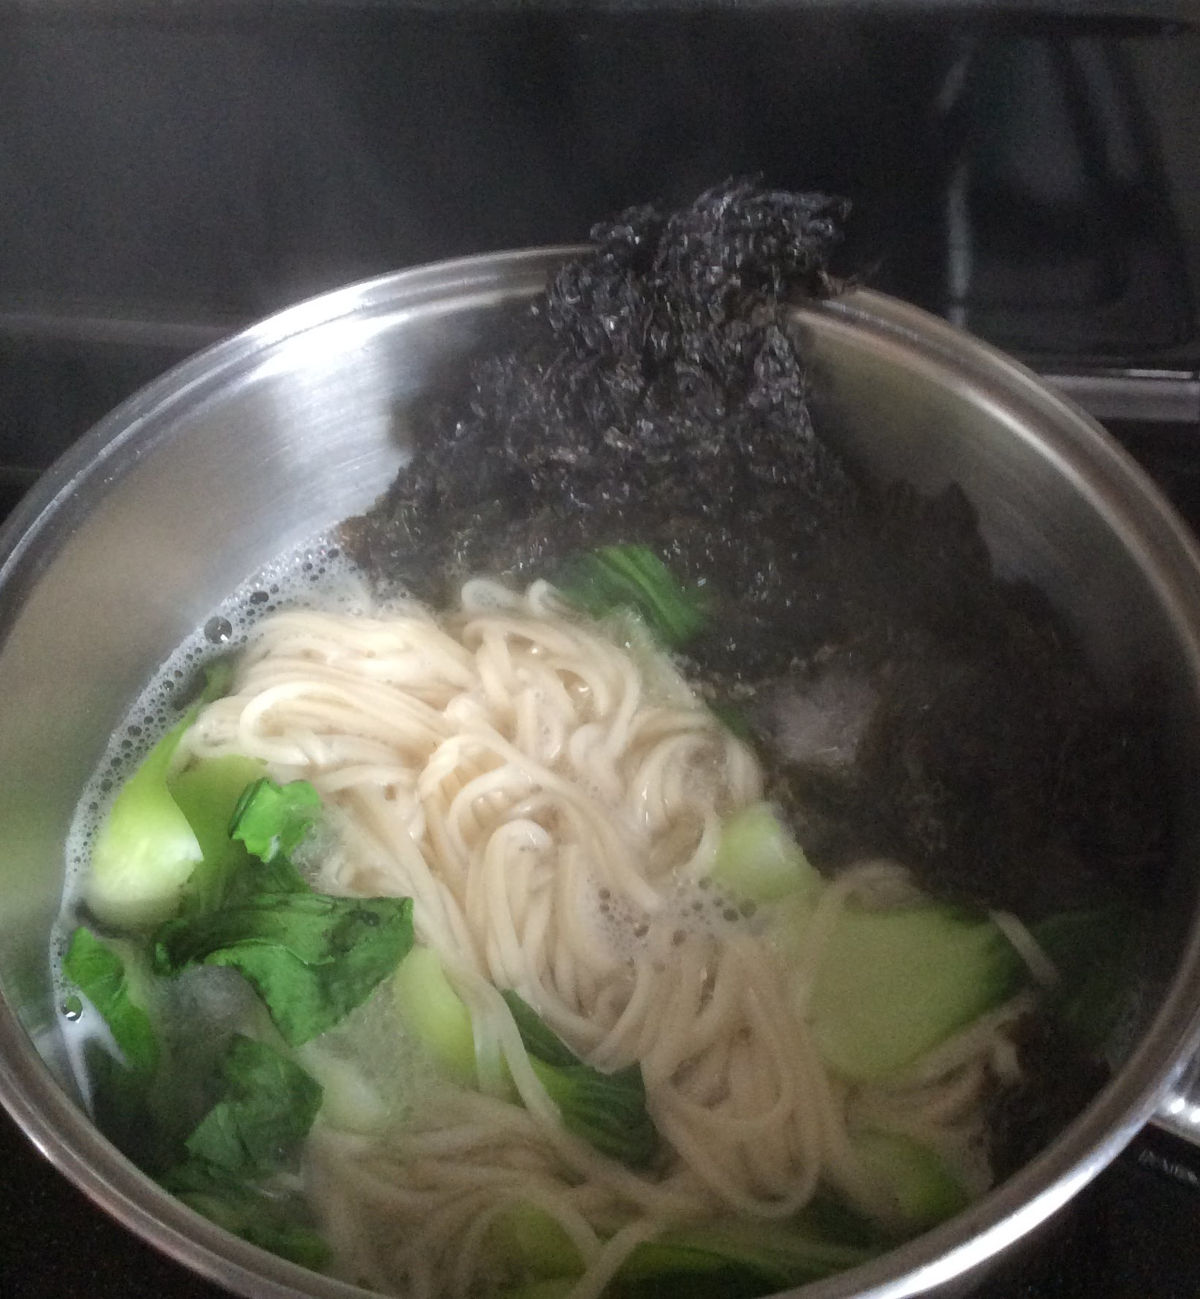 Noodles, bok choy and seaweed cooking in boiling water in the pot.